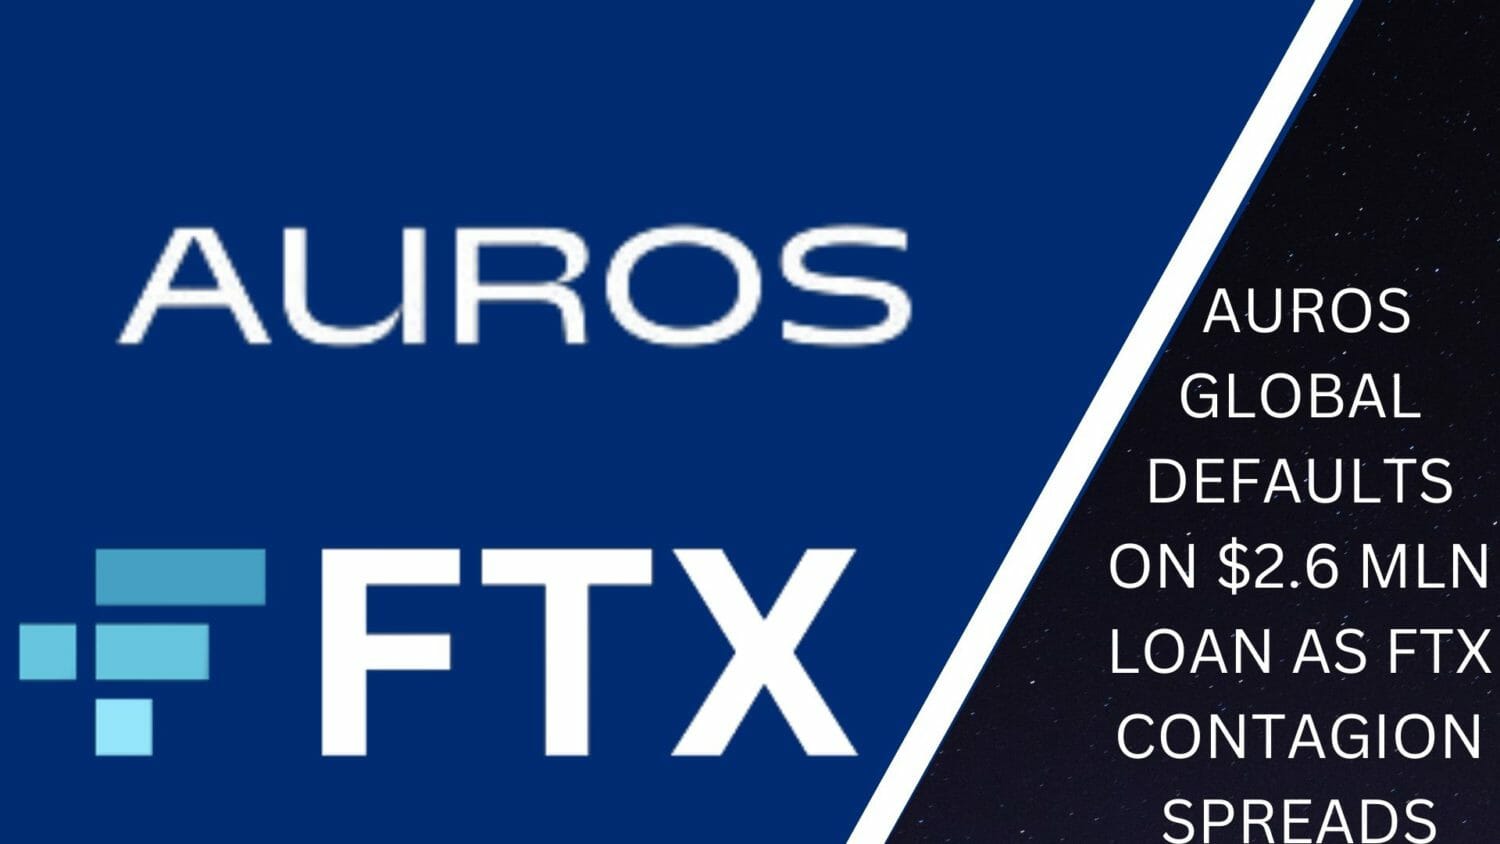 Crypto Trader Auros Global Defaults On $2.6 Mln Loan As Ftx Contagion Spreads